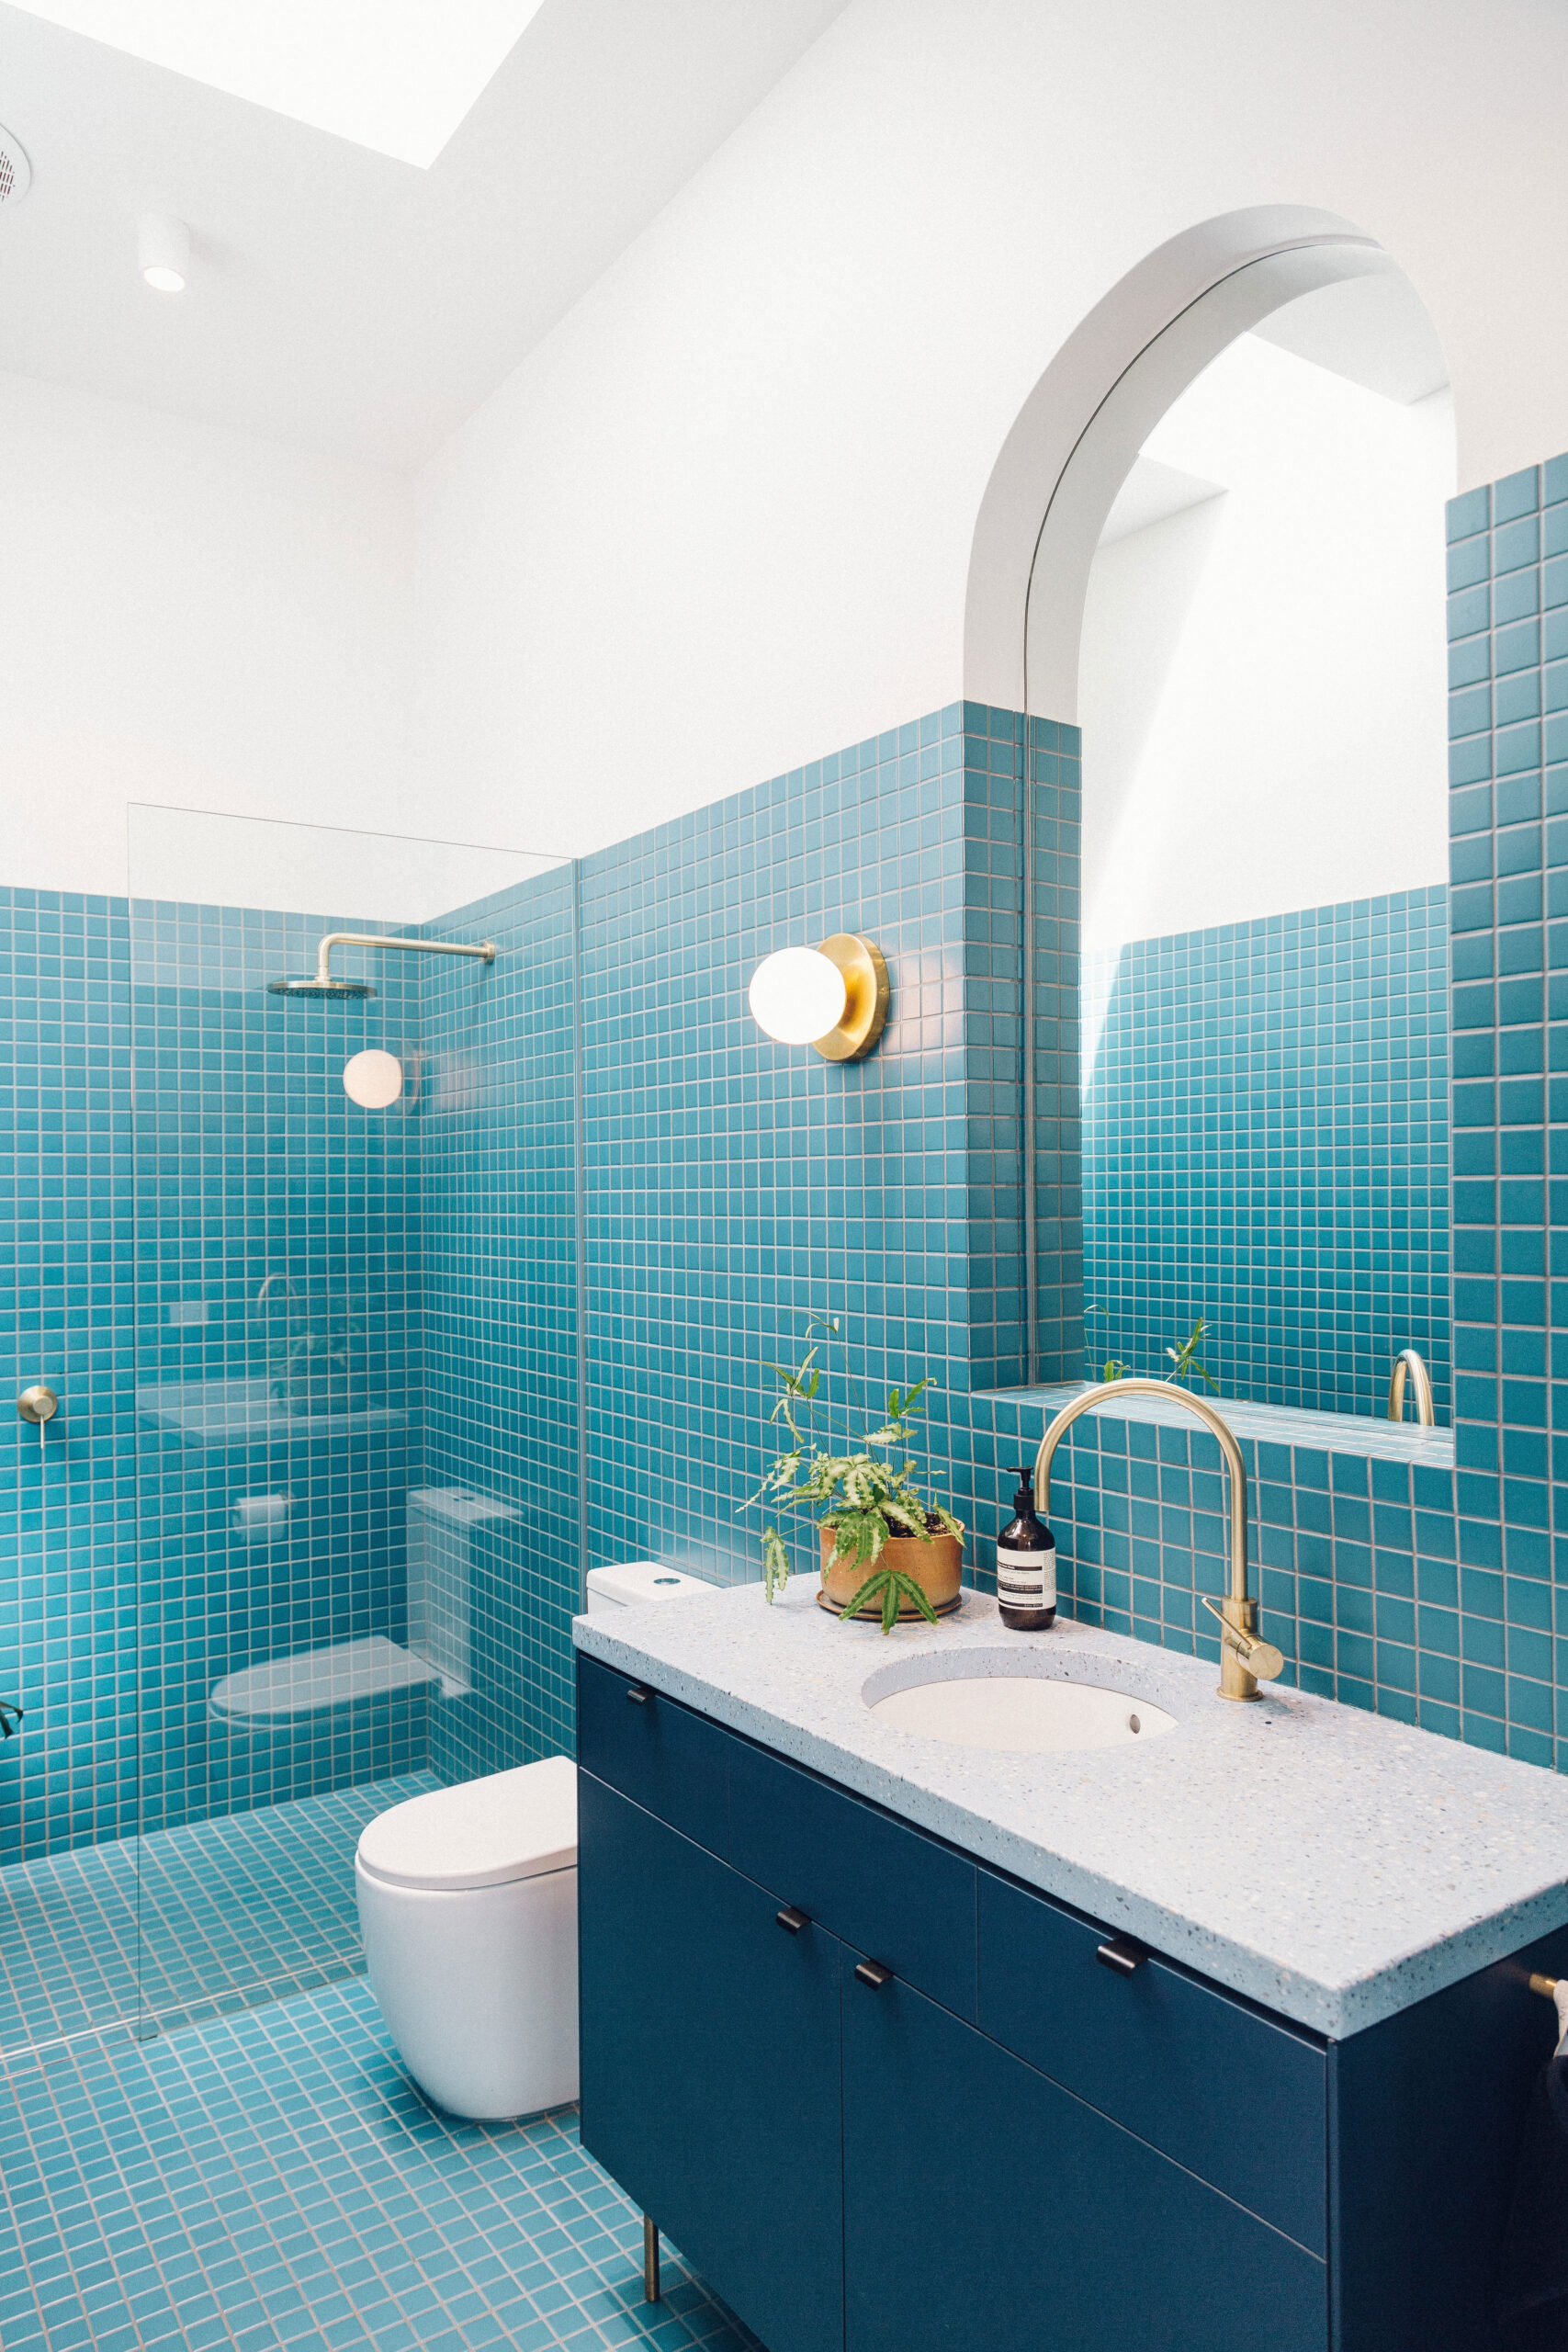 Bathroom Remodel Ideas to Inspire Your Next Renovation